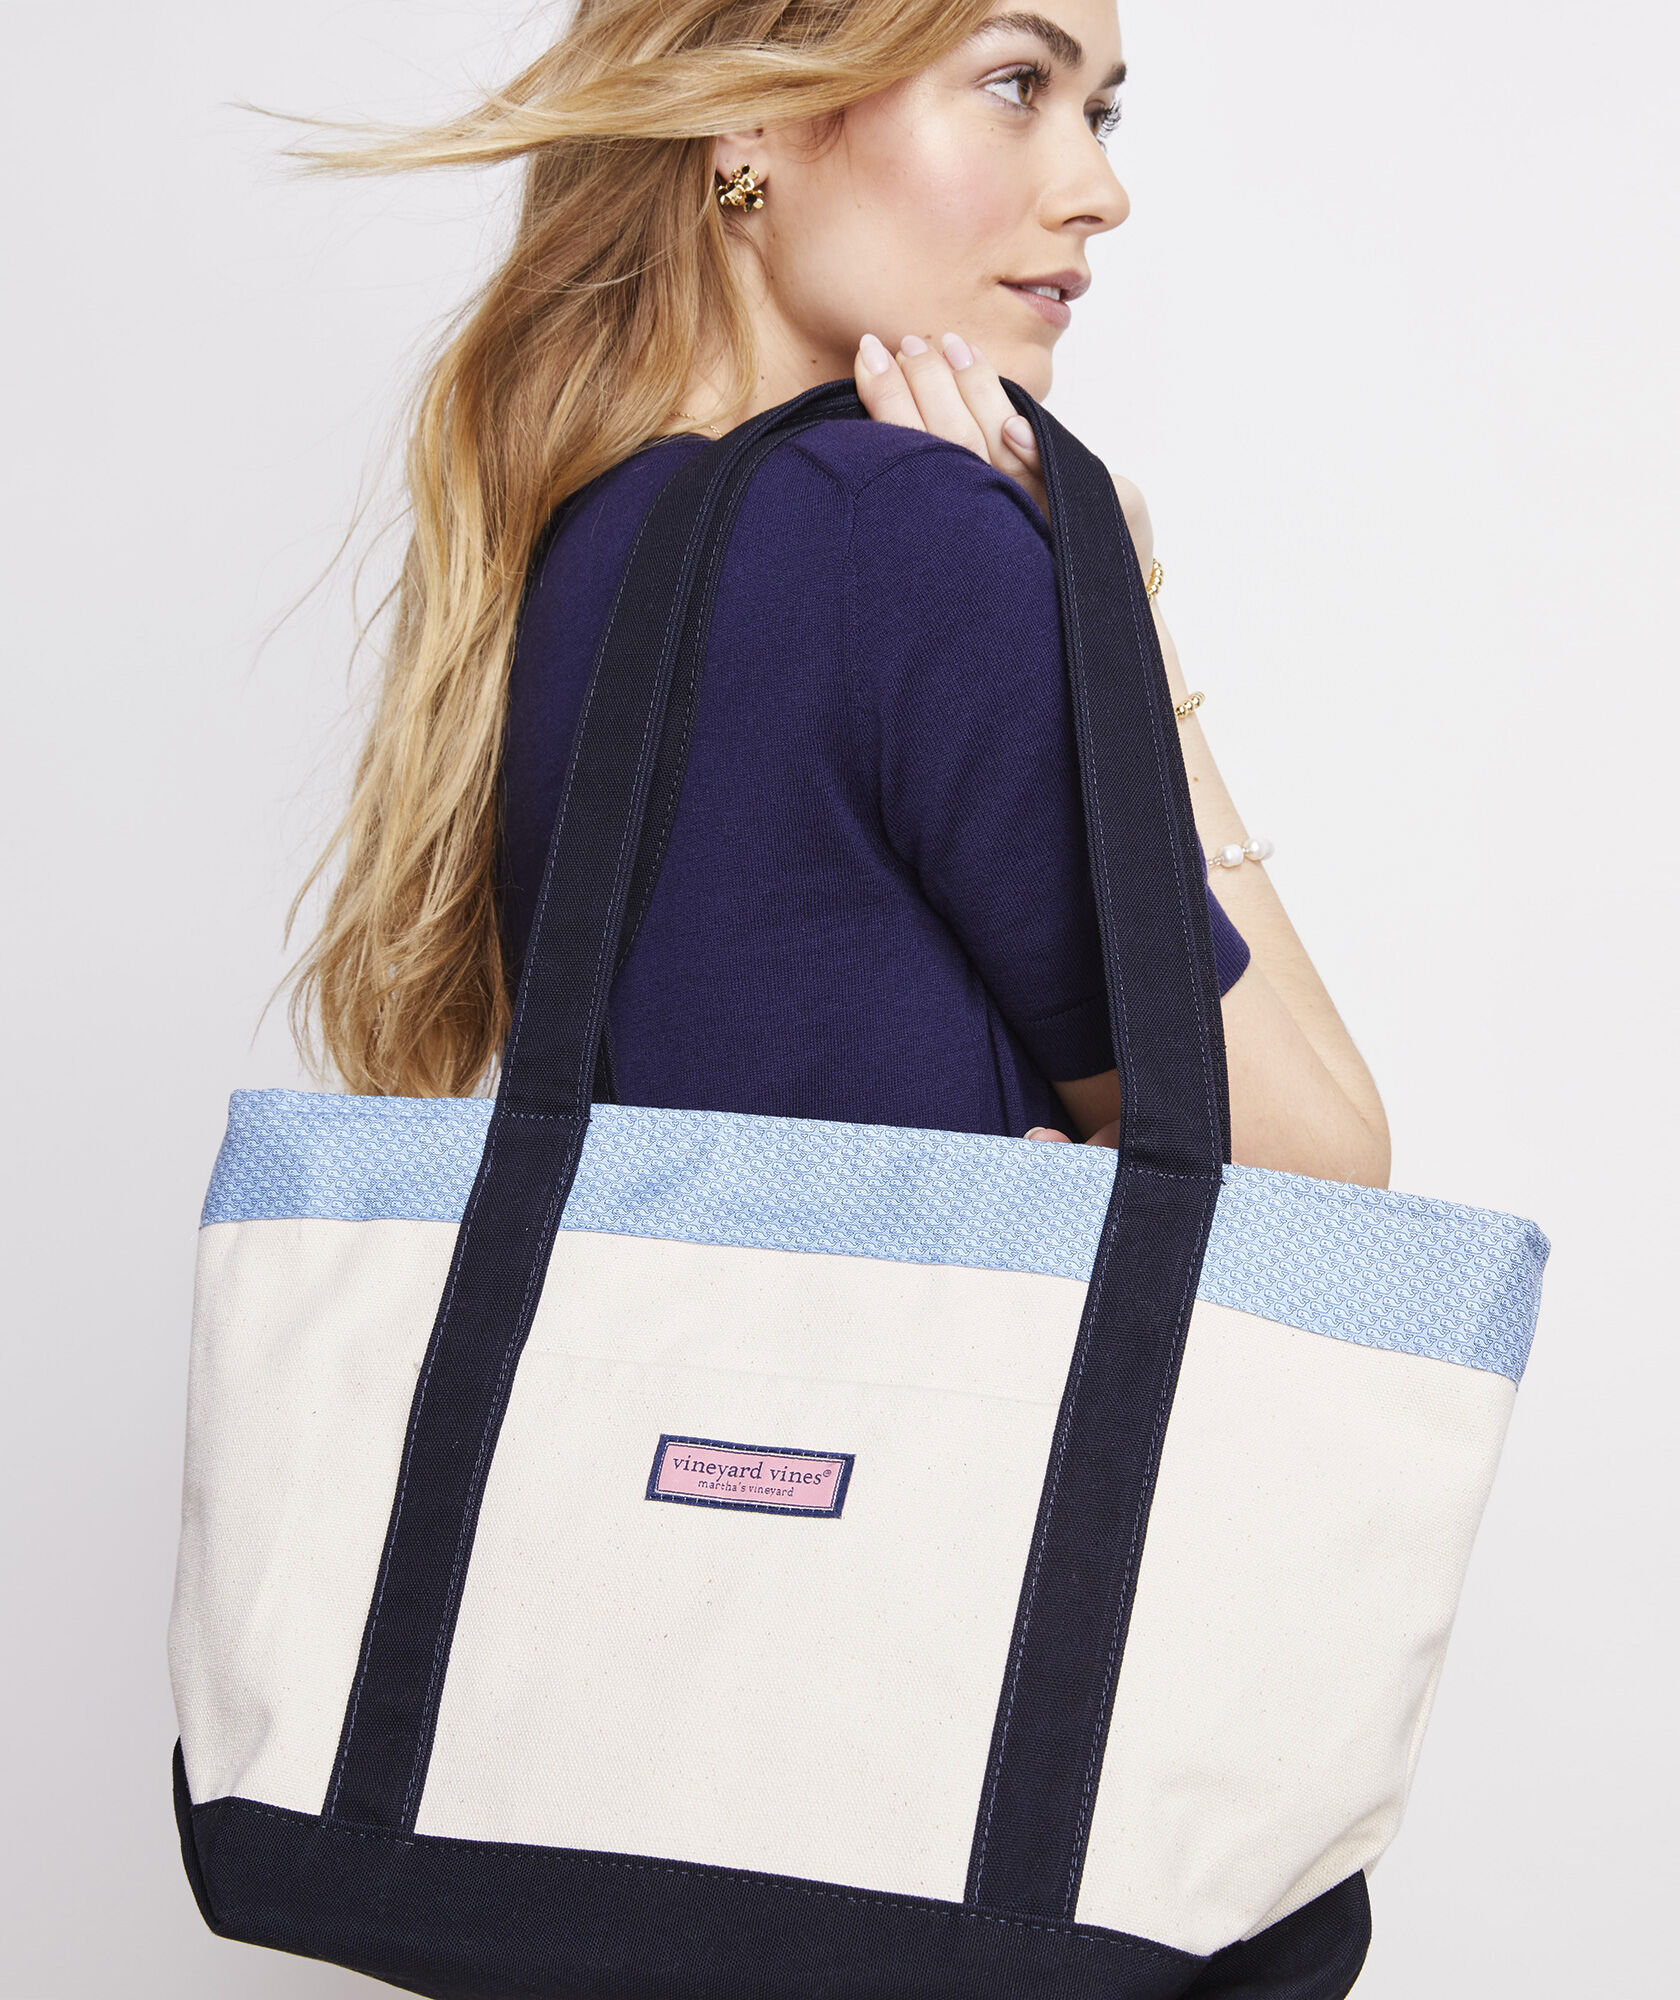 Vineyard Vines nautical navy & white rare tote | Navy and white, Oversized  purse, Womens tote bags